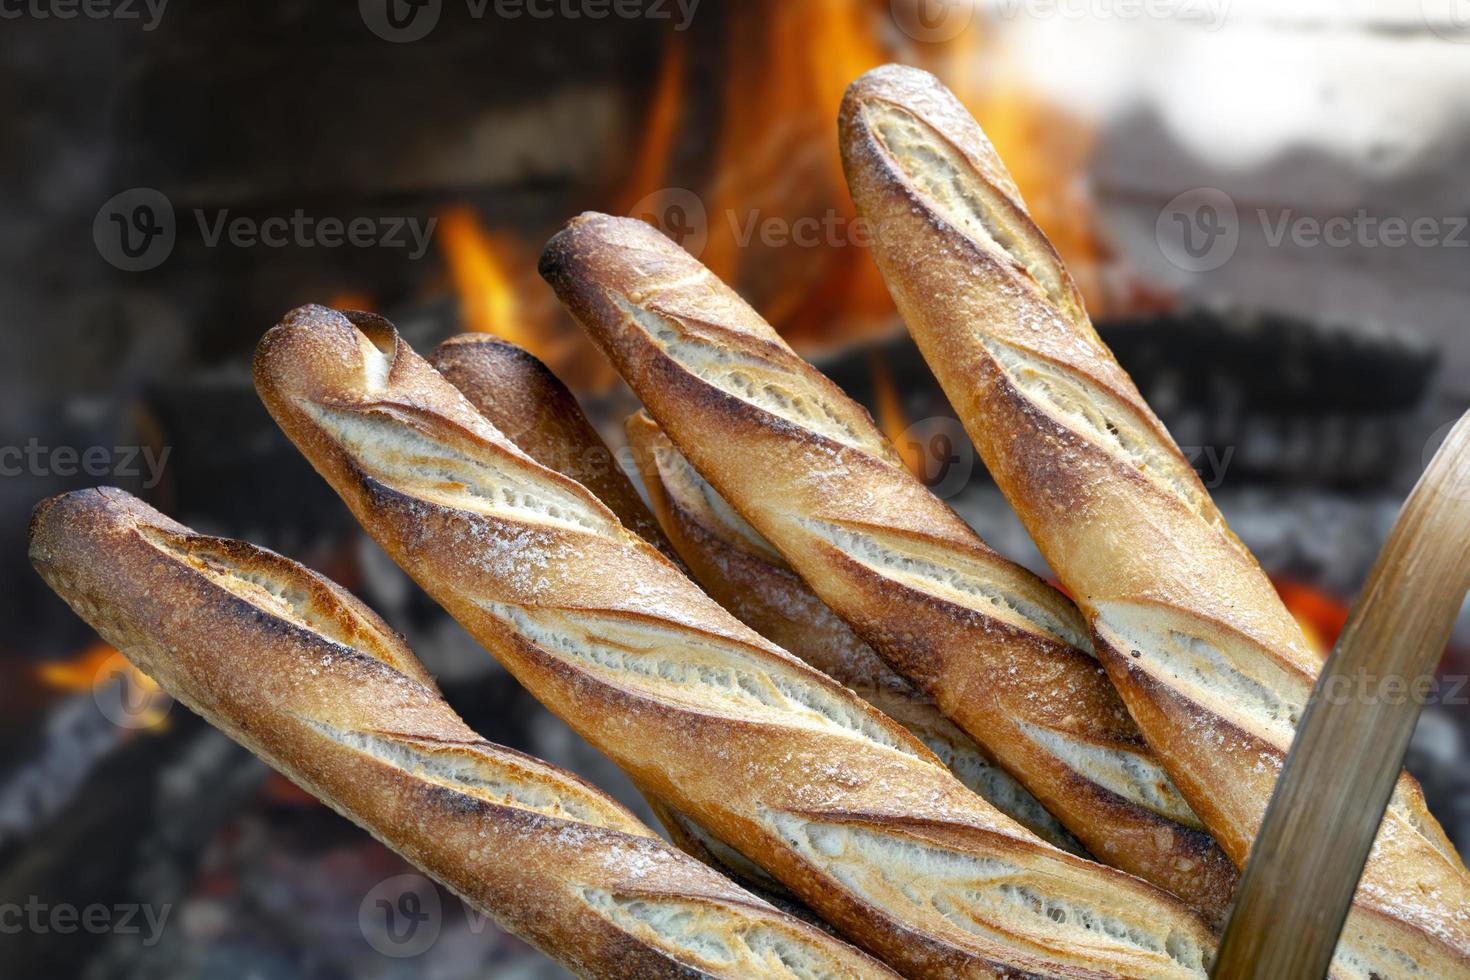 Basket of bread baked in a wood oven photo